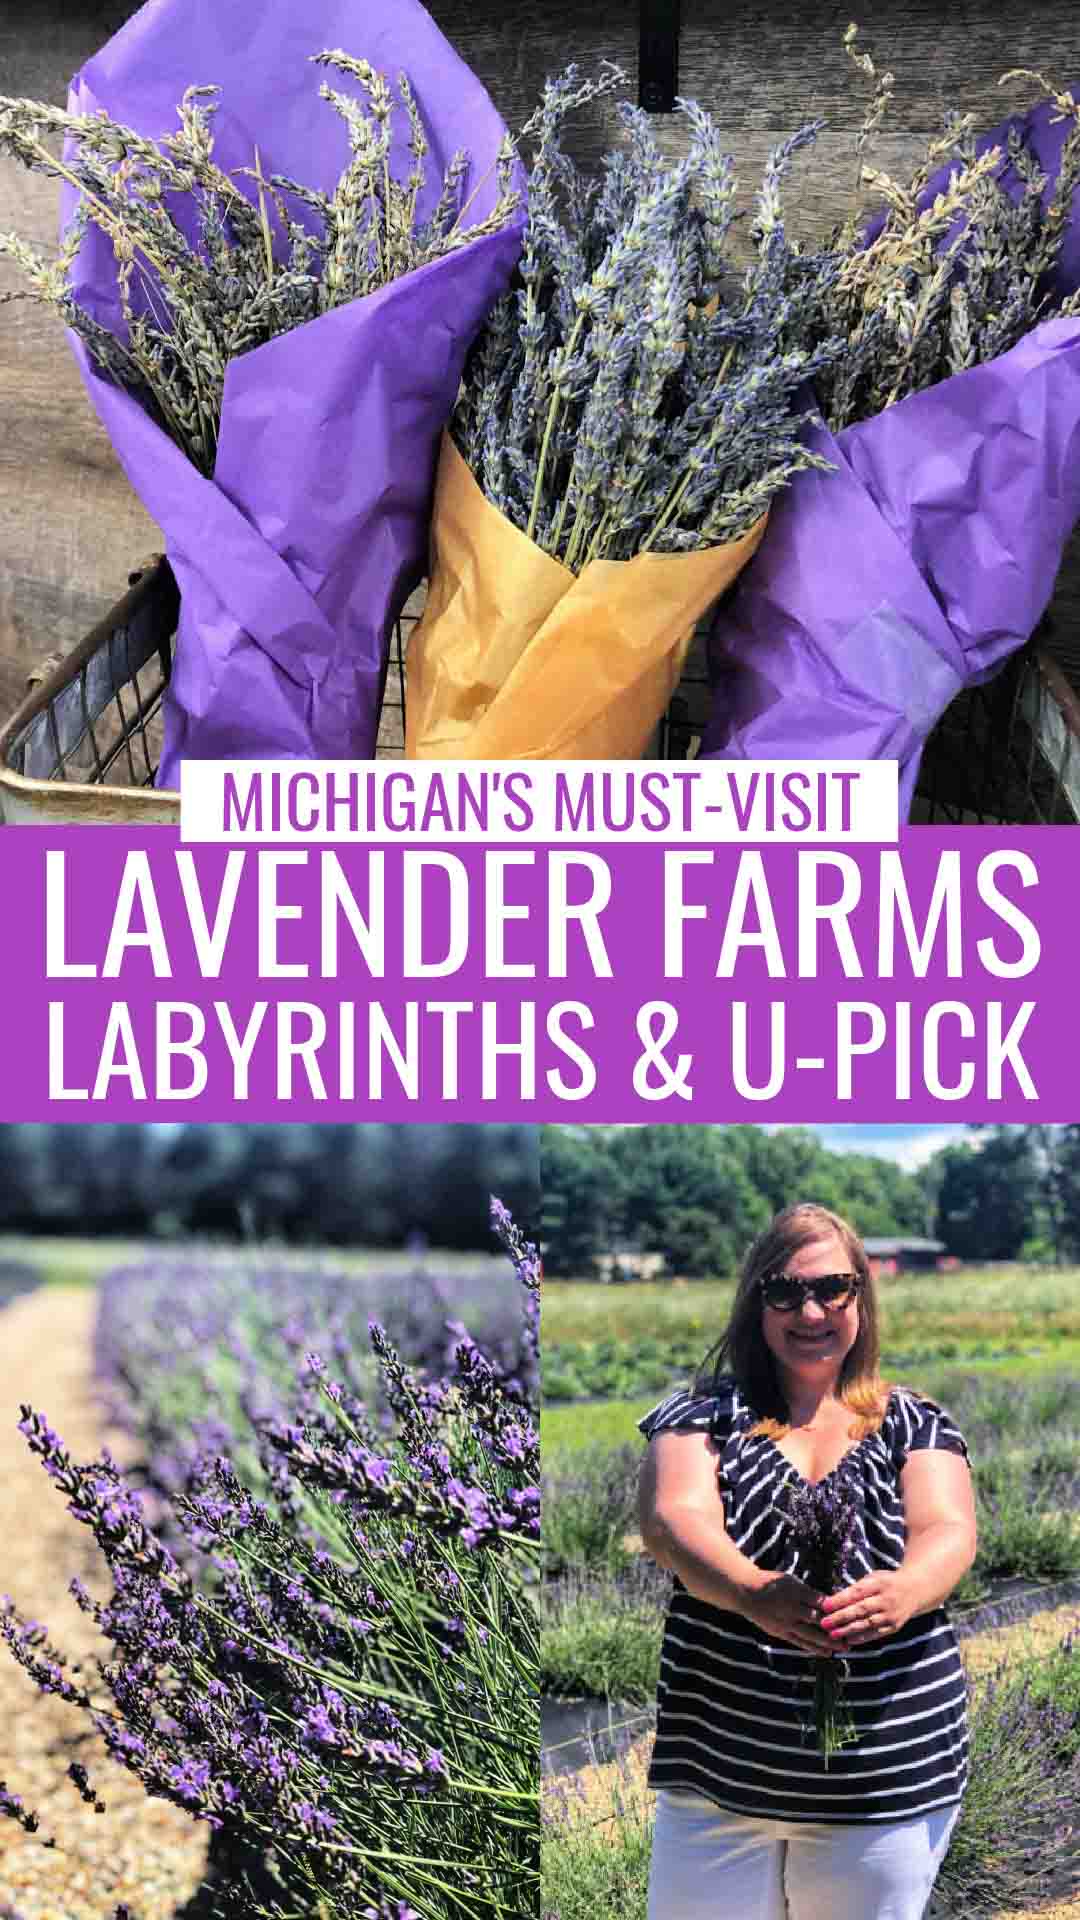 Michigan lavender farms collage featuring three bouquets of dried lavender in metal-wire basket, a woman in white shorts and navy-with-white-stripes shirt holding lavender bouquet while standing in lavender farm field, and close up of lavender growing in a lavender field